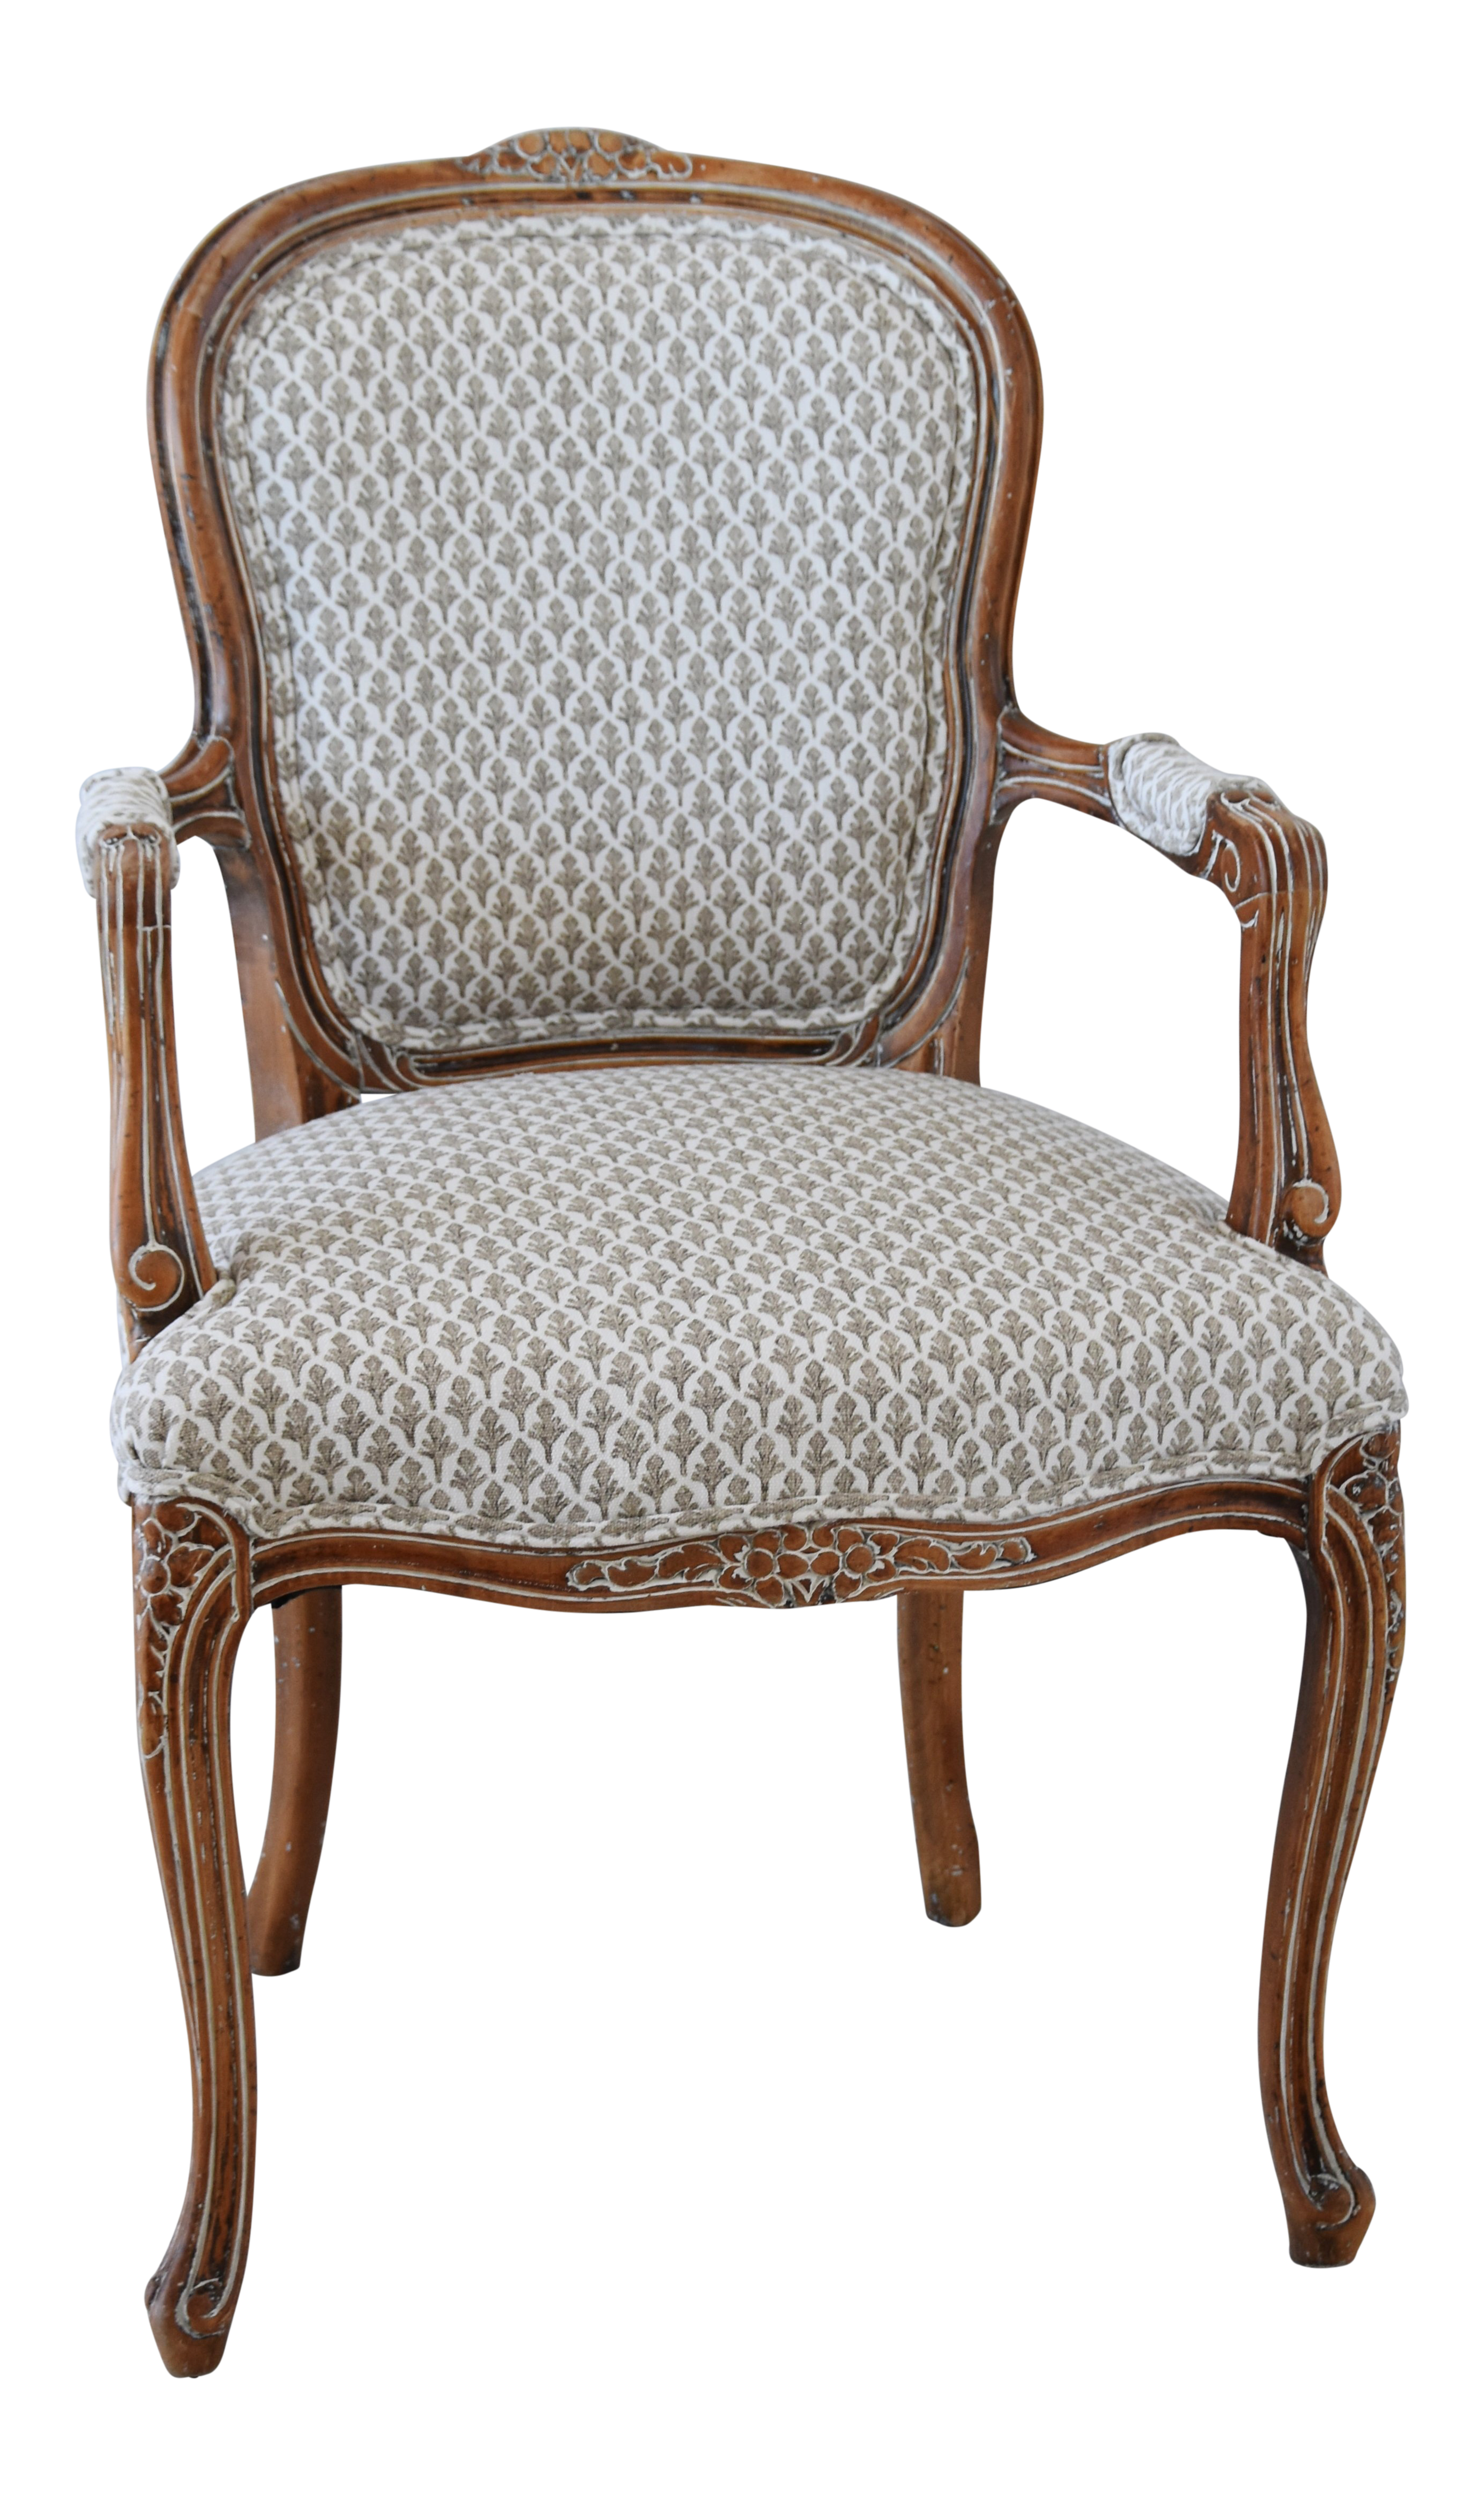 1950s Carved Wood Upholstered French Armchair | Chairish